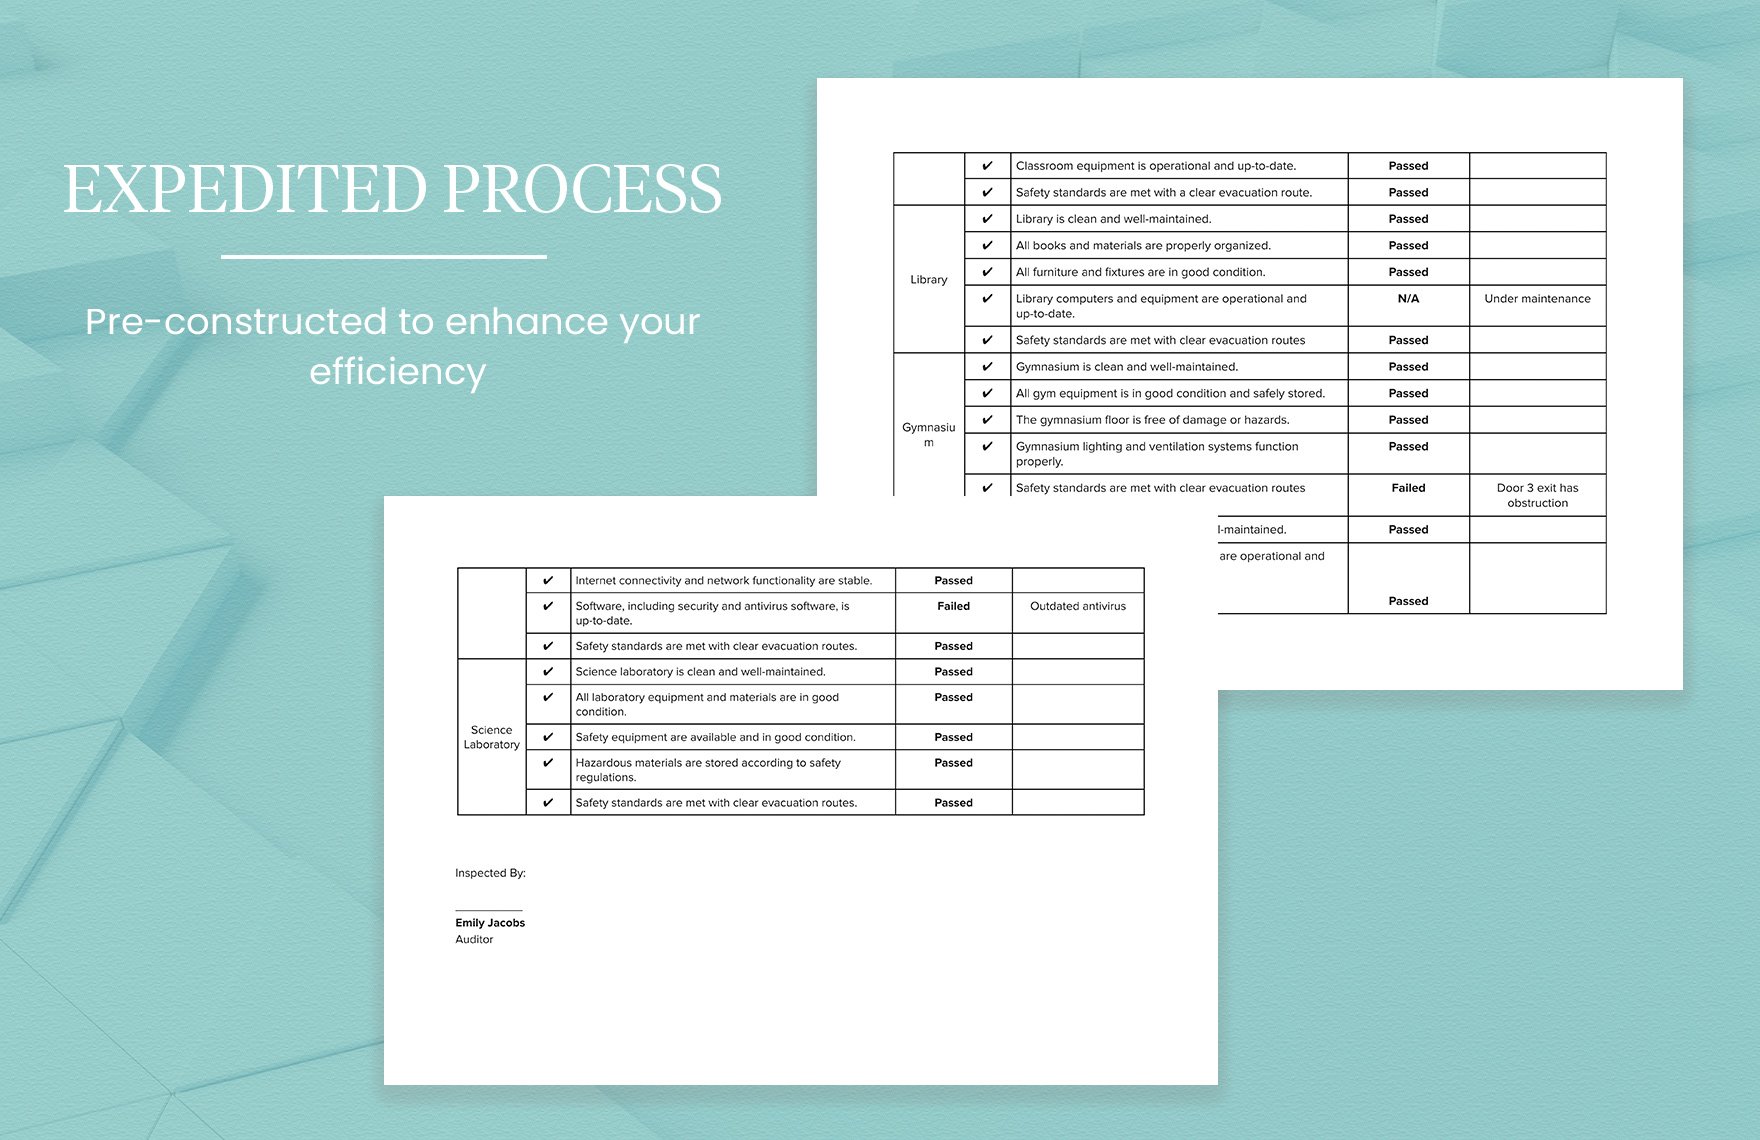 Education Facility Inspection Checklist Template